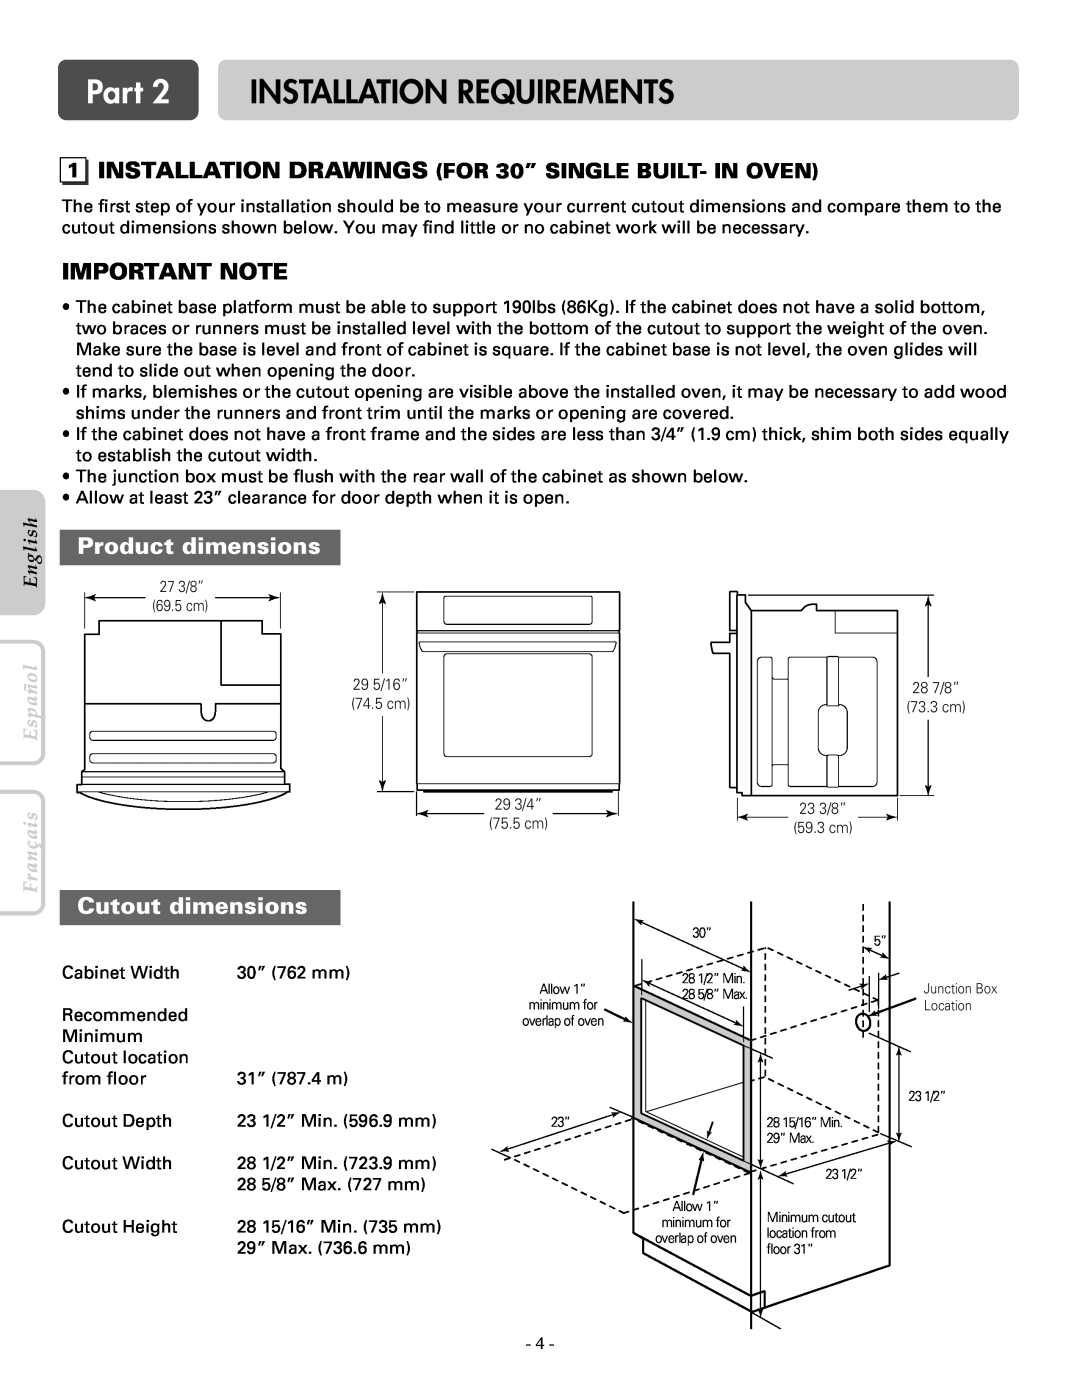 LG Electronics LWS3081ST Part 2 INSTALLATION REQUIREMENTS, Product dimensions, Cutout dimensions, Important Note, English 